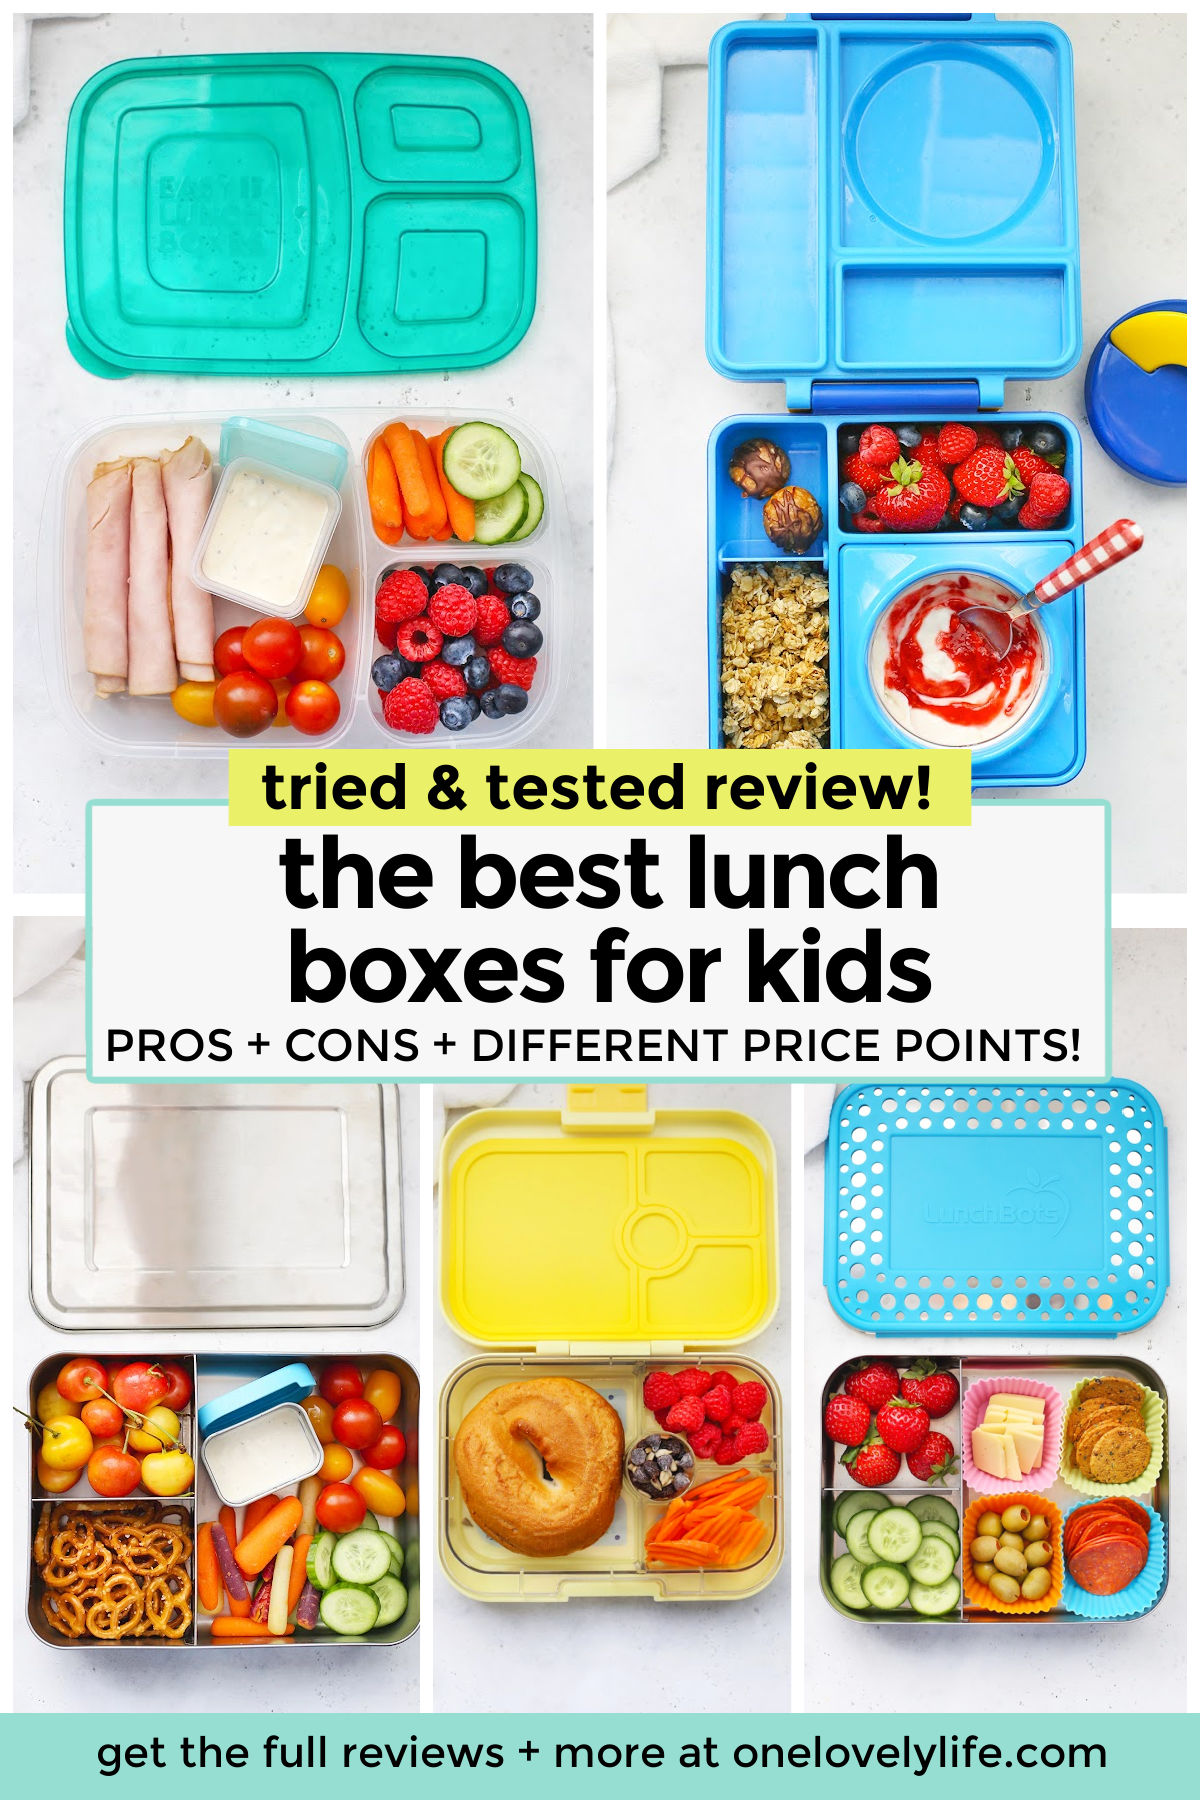 The BEST School Lunch Boxes and Reusable Bags for packing school lunches! Find out the pros and cons of each one. // school lunches // packed lunches // kids lunch box review // lunch boxes // the best kids' lunch boxes // reusable bags // omie box lunch boxes // easy lunchboxes // packed lunches // stashers bags // rezip bags // russbe bags // eco friendly // less waste // healthy kids